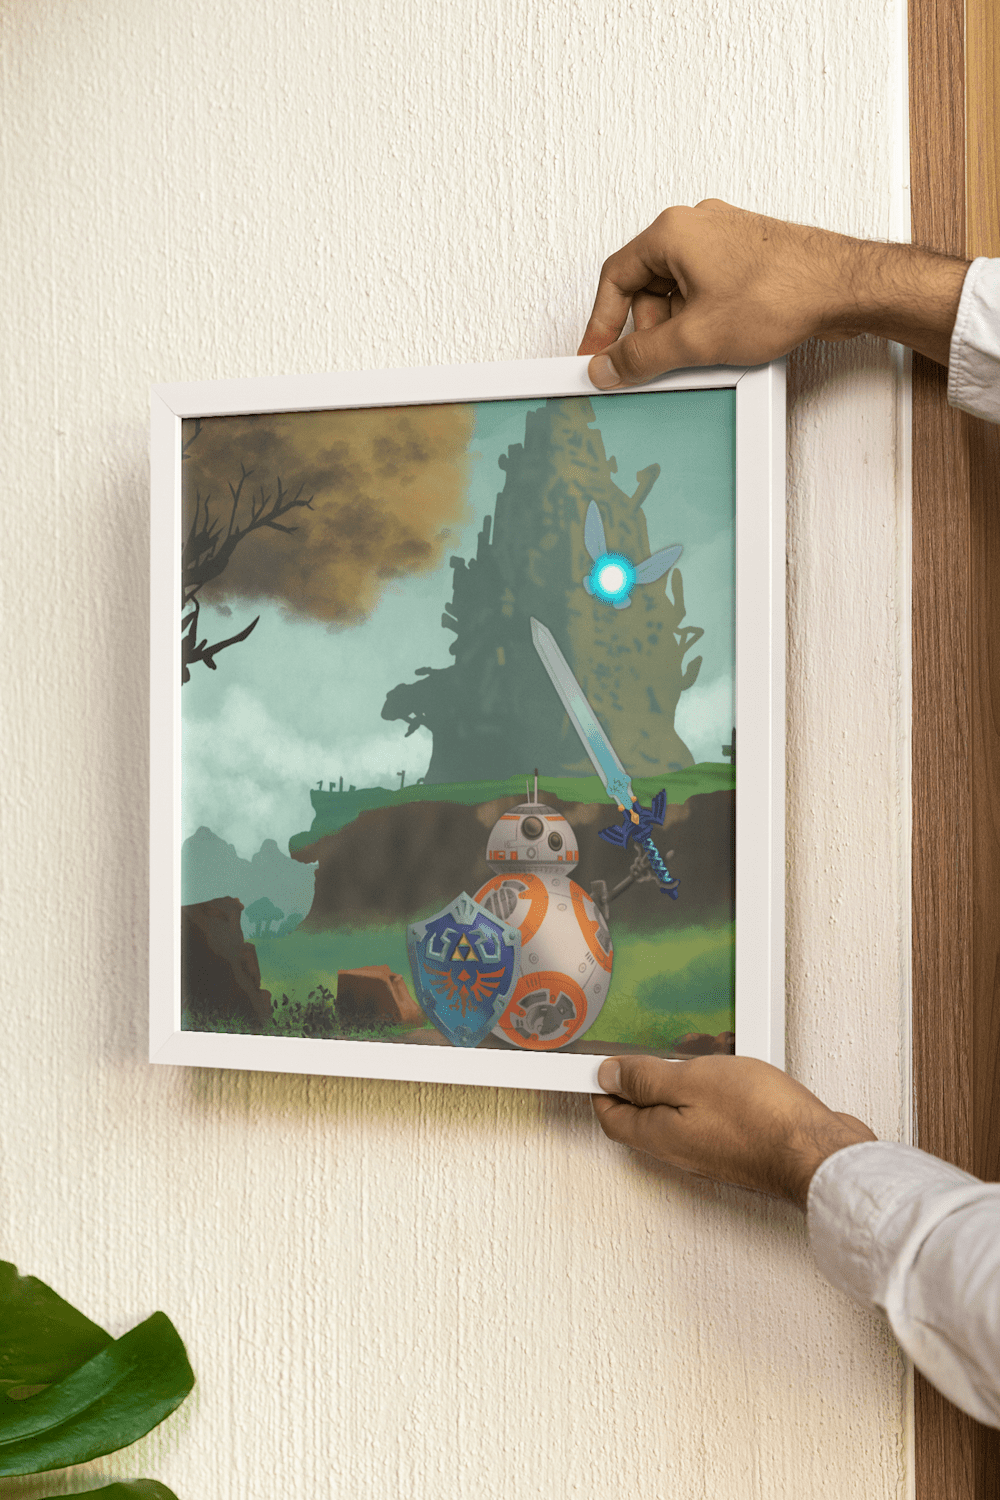 "Master Droid" shown framed and hanging up on the wall.